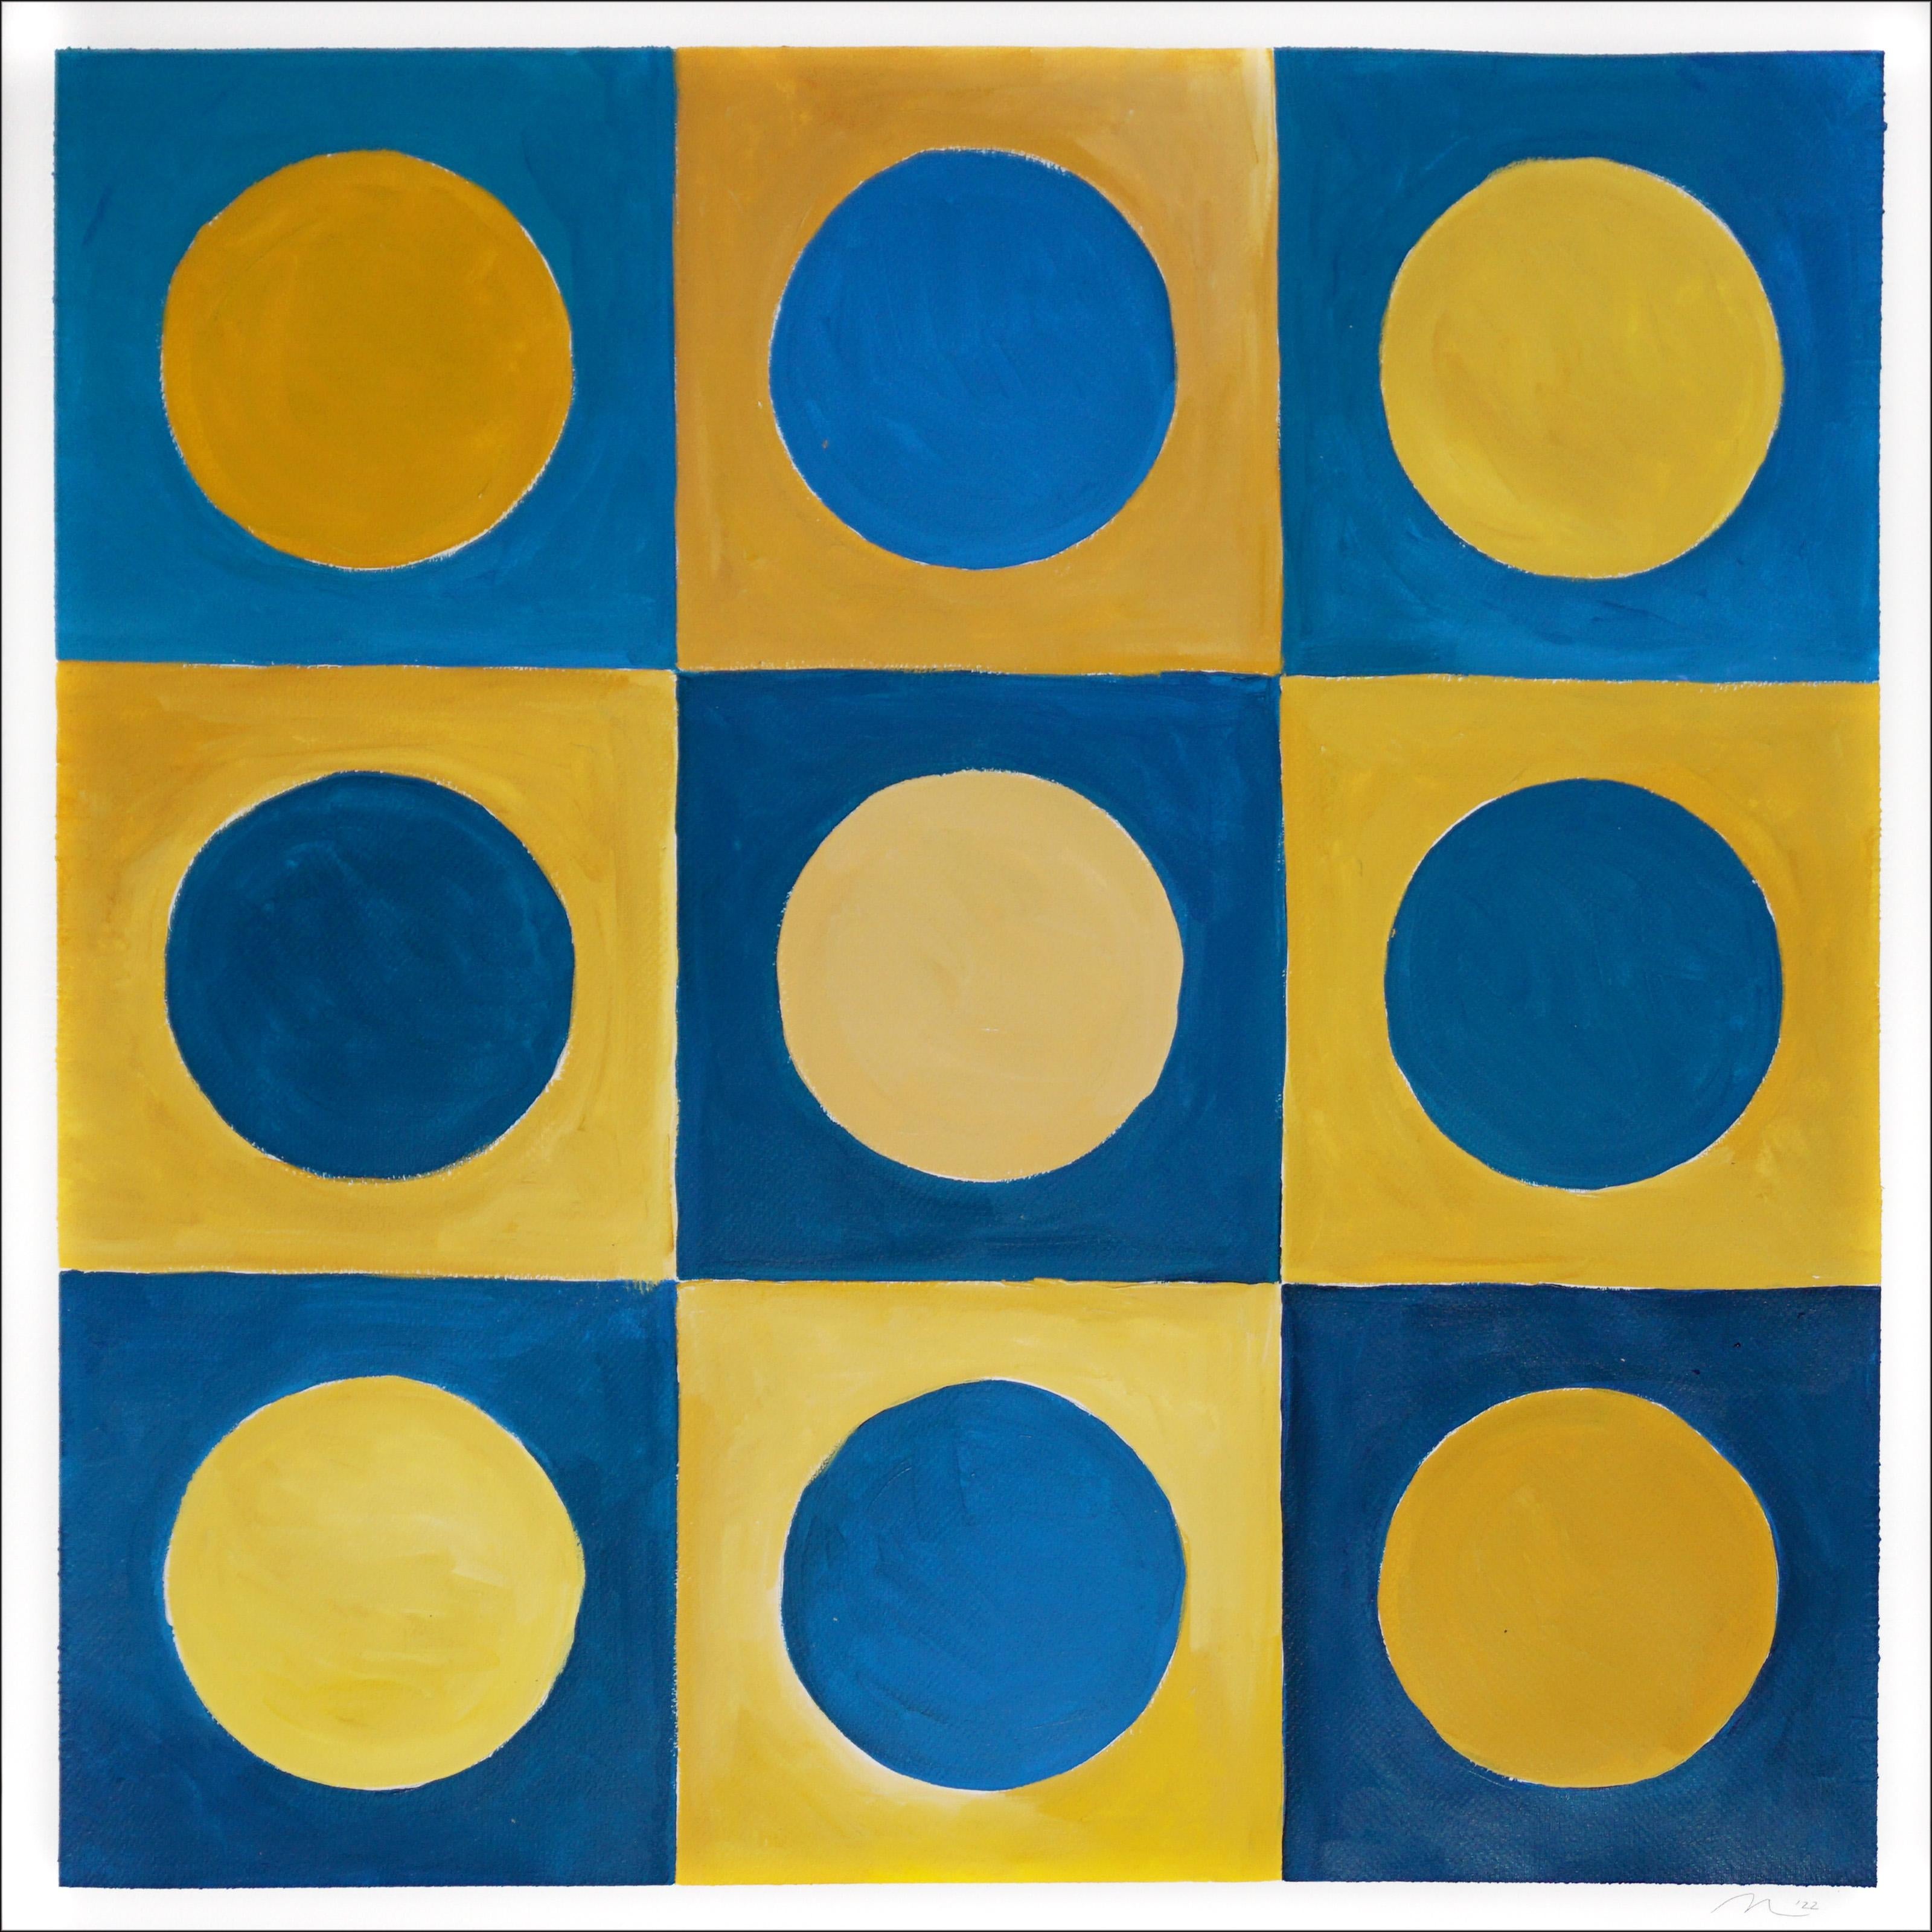 Pale Blue Dots, Primary Geometry Grid, Yellow and Blue, Complementary Tones 